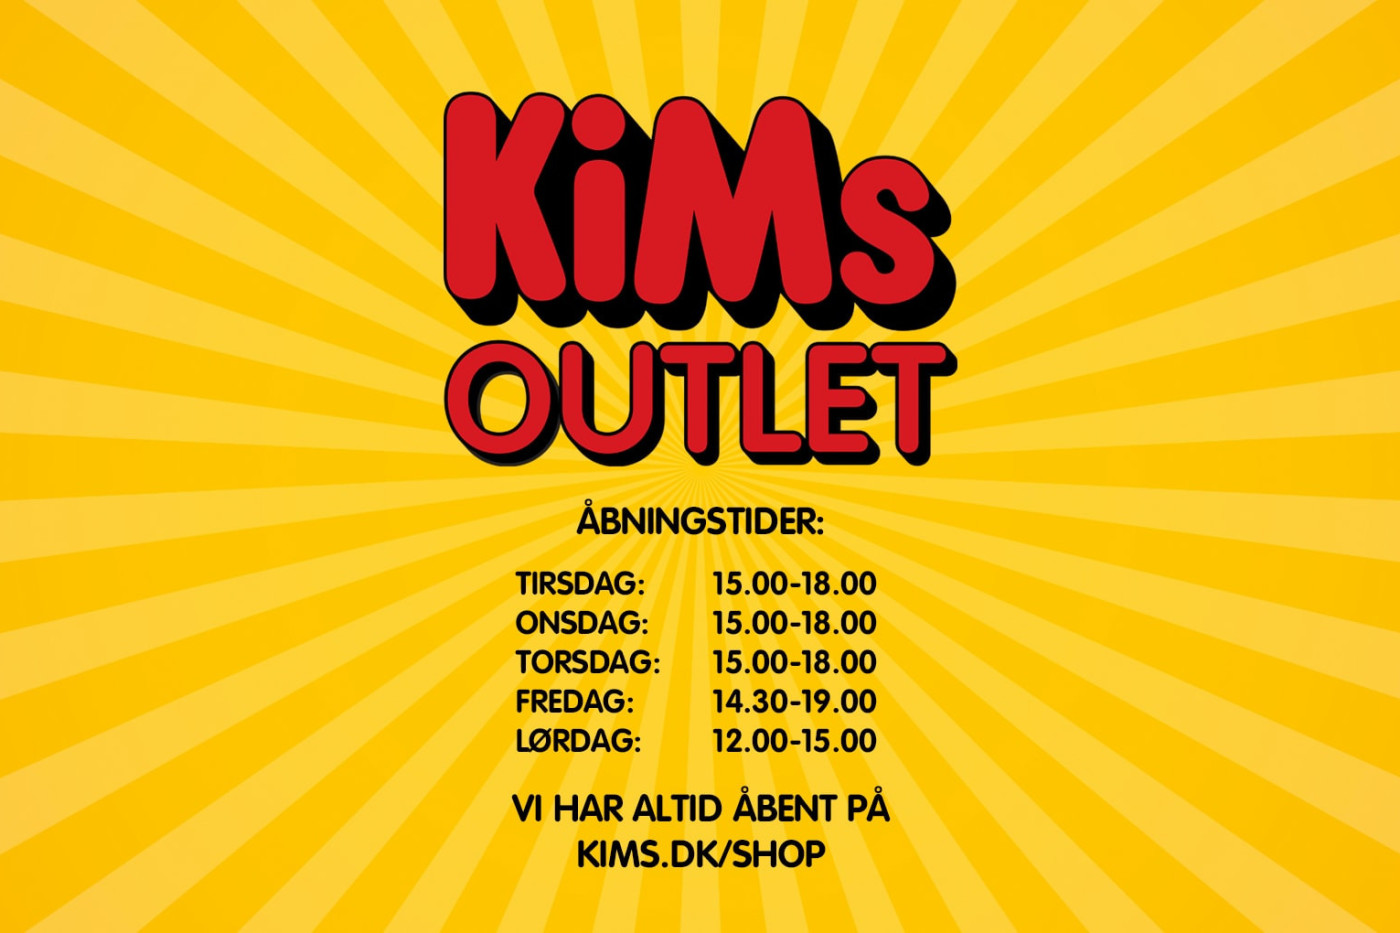 KIMs Outlet